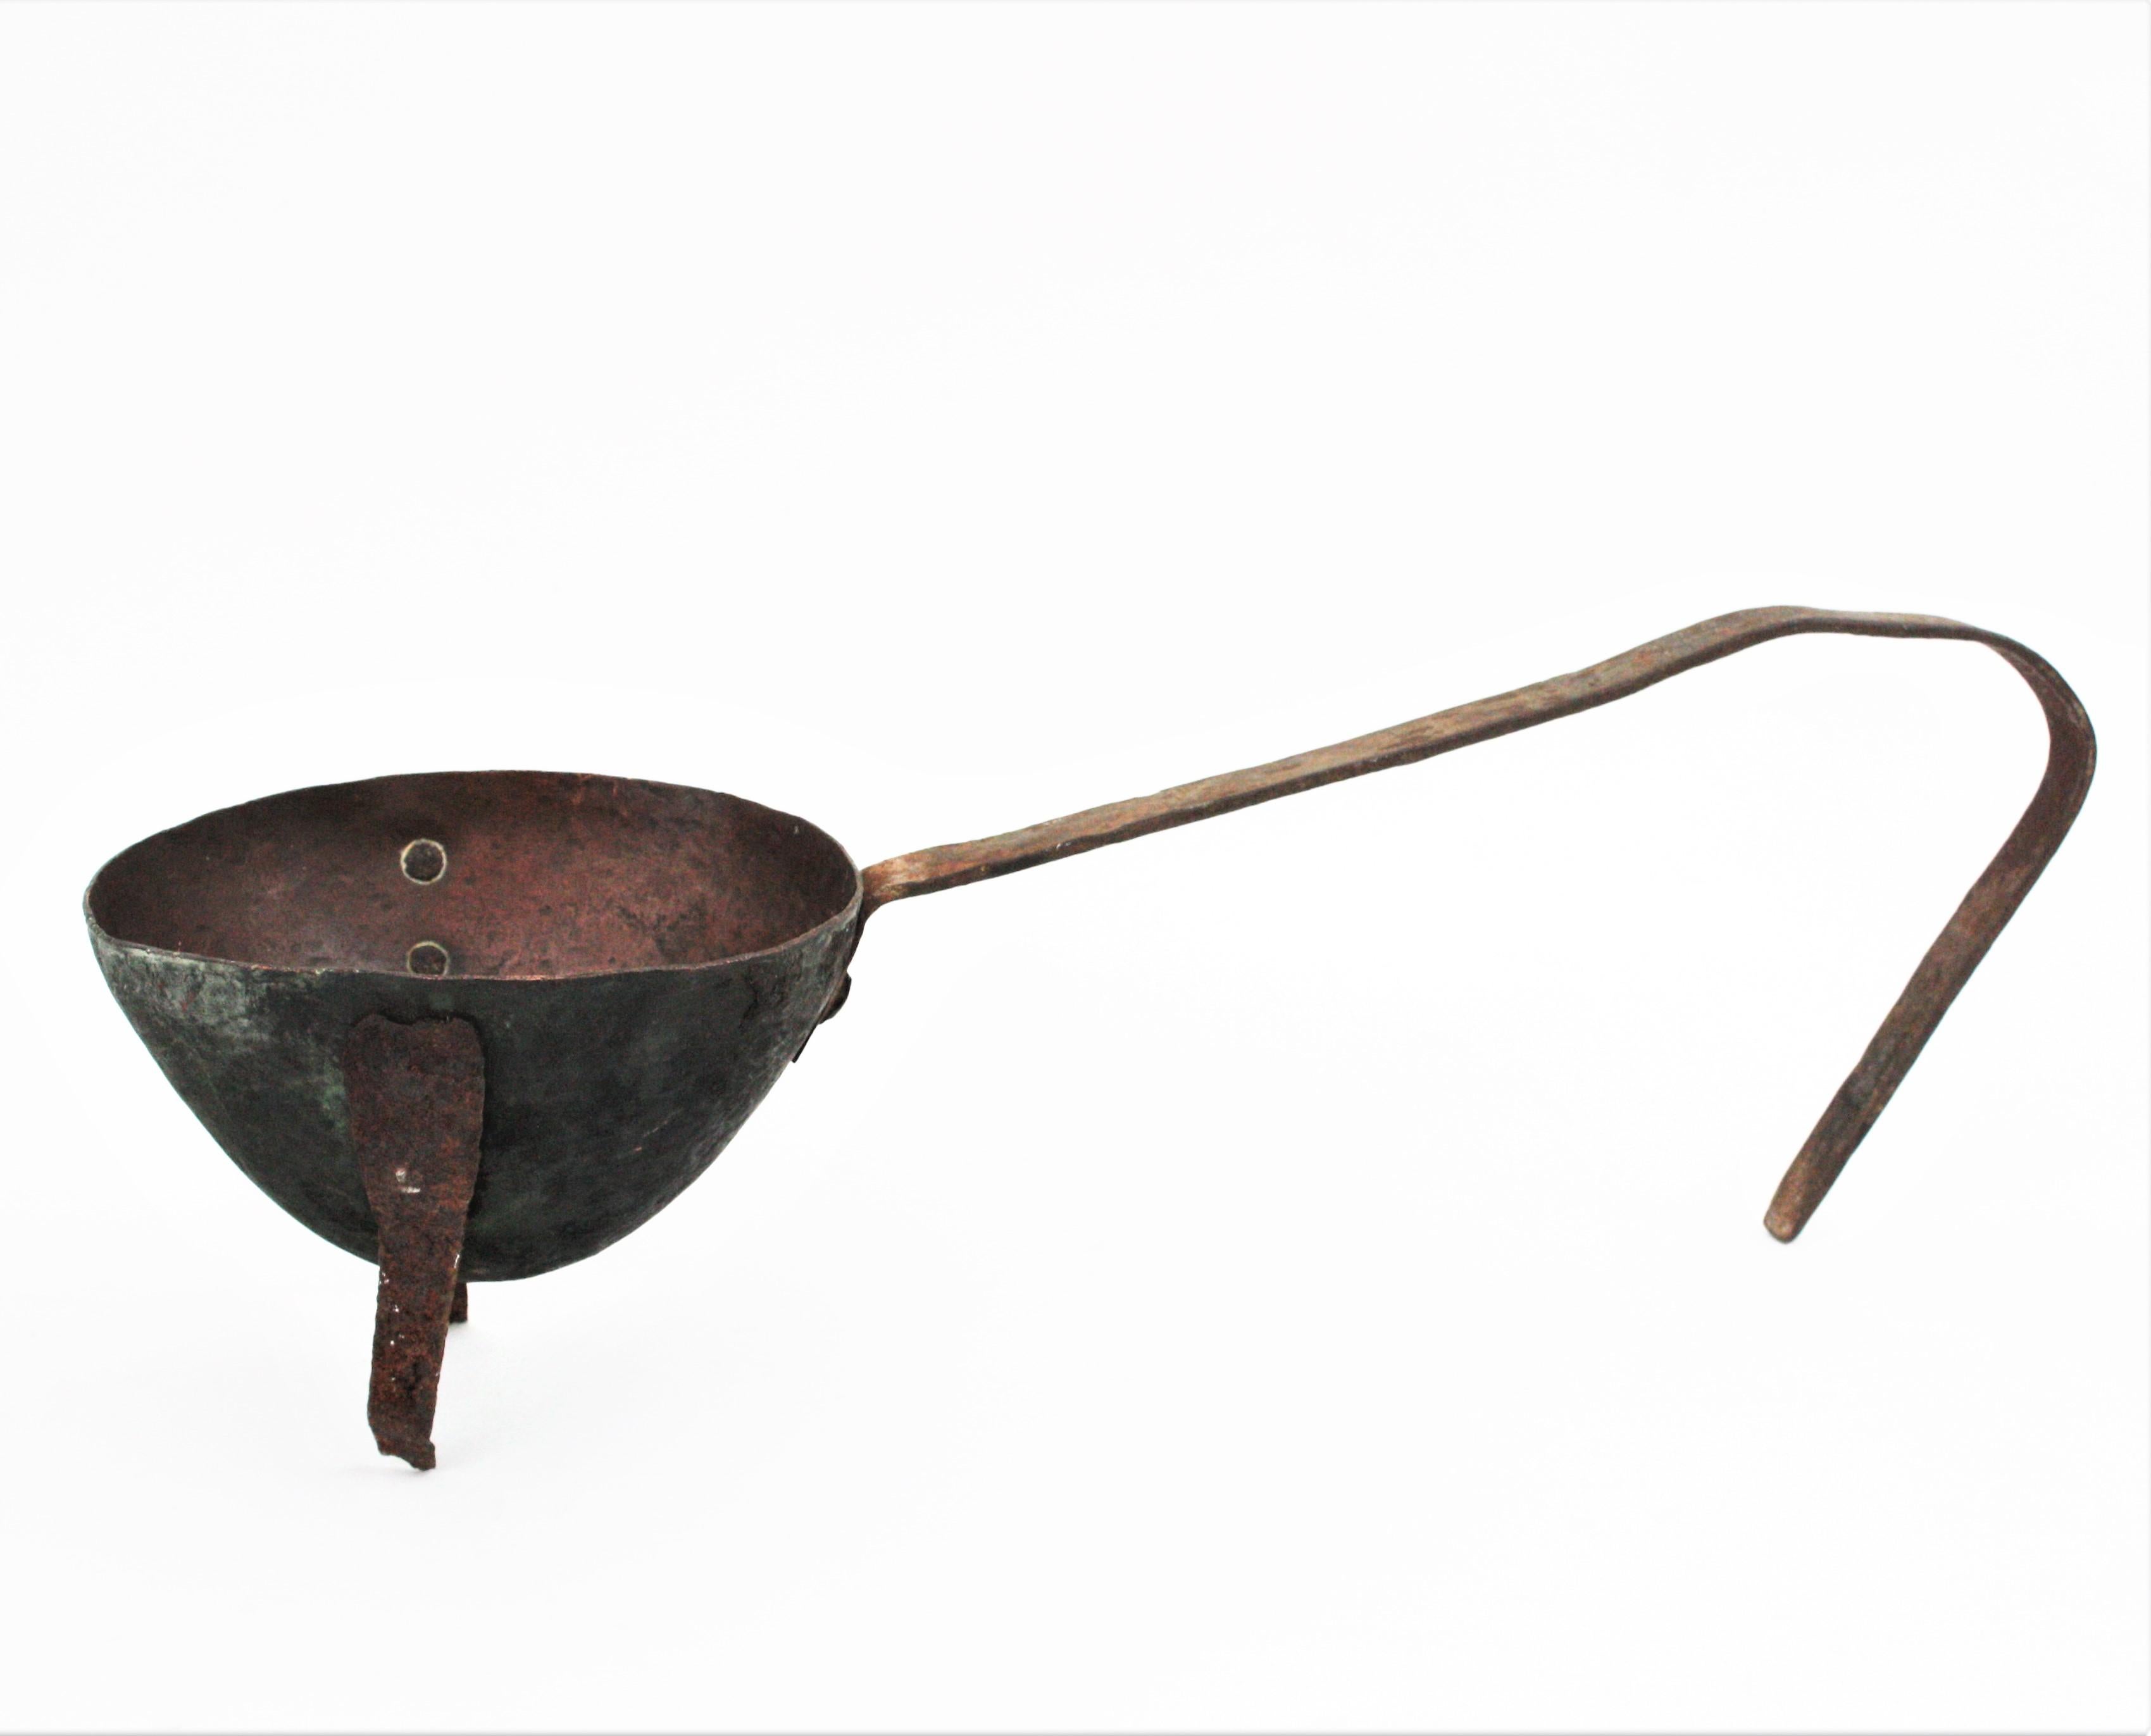 Antique traditional foundry smelting tool, Spain, 1930s-1940s.
Very rustic and primitive iron and copper smelting standing ladle shaped tool.
Originally used to melt metals. Currently displayed as centerpiece or decorative vessel.
Hand forged in